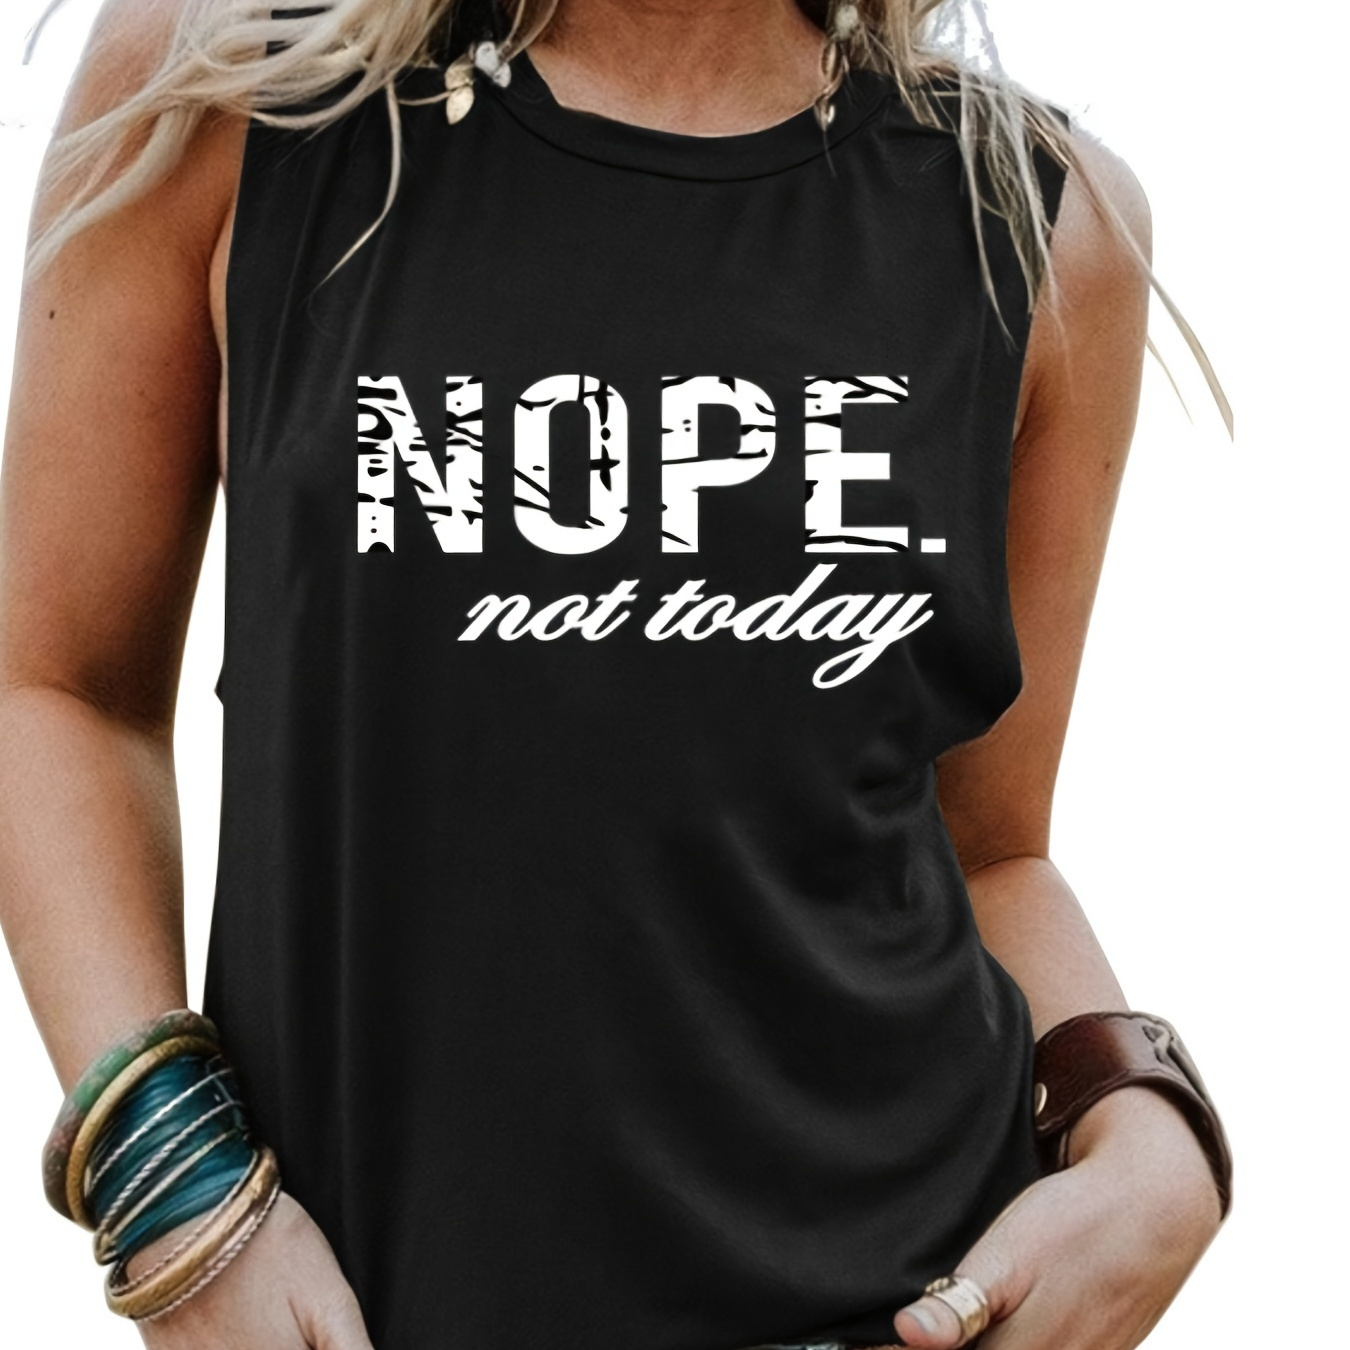 

Nope Not Today Graphic Print Tank Top, Sleeveless Crew Neck Casual Top For All Season, Women's Clothing